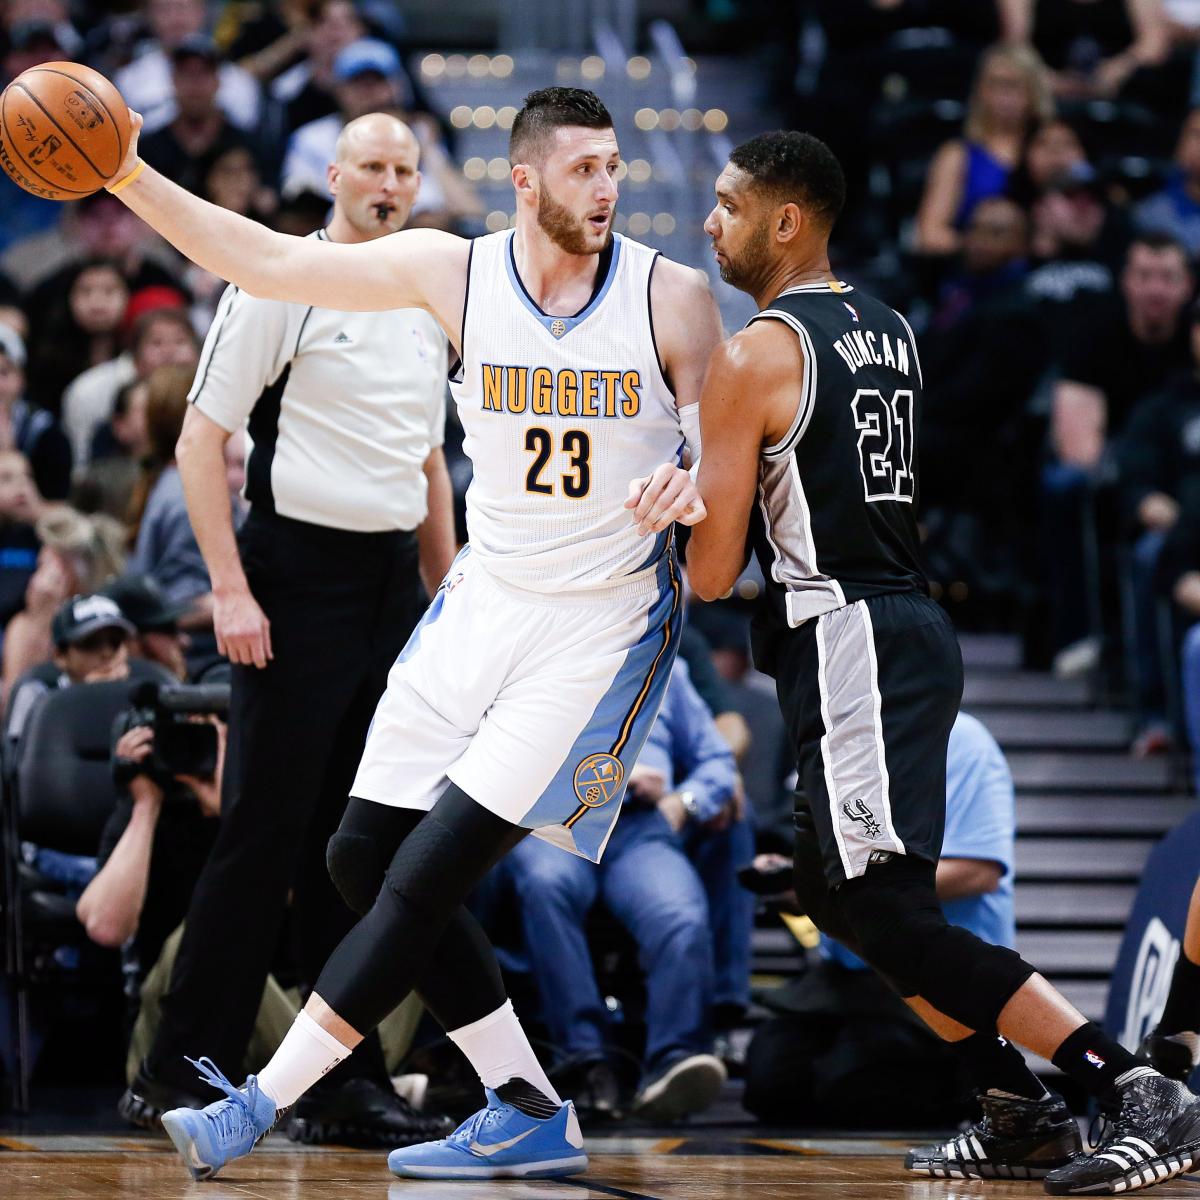 Spurs vs. Nuggets Score, Video Highlights and Recap from April 8